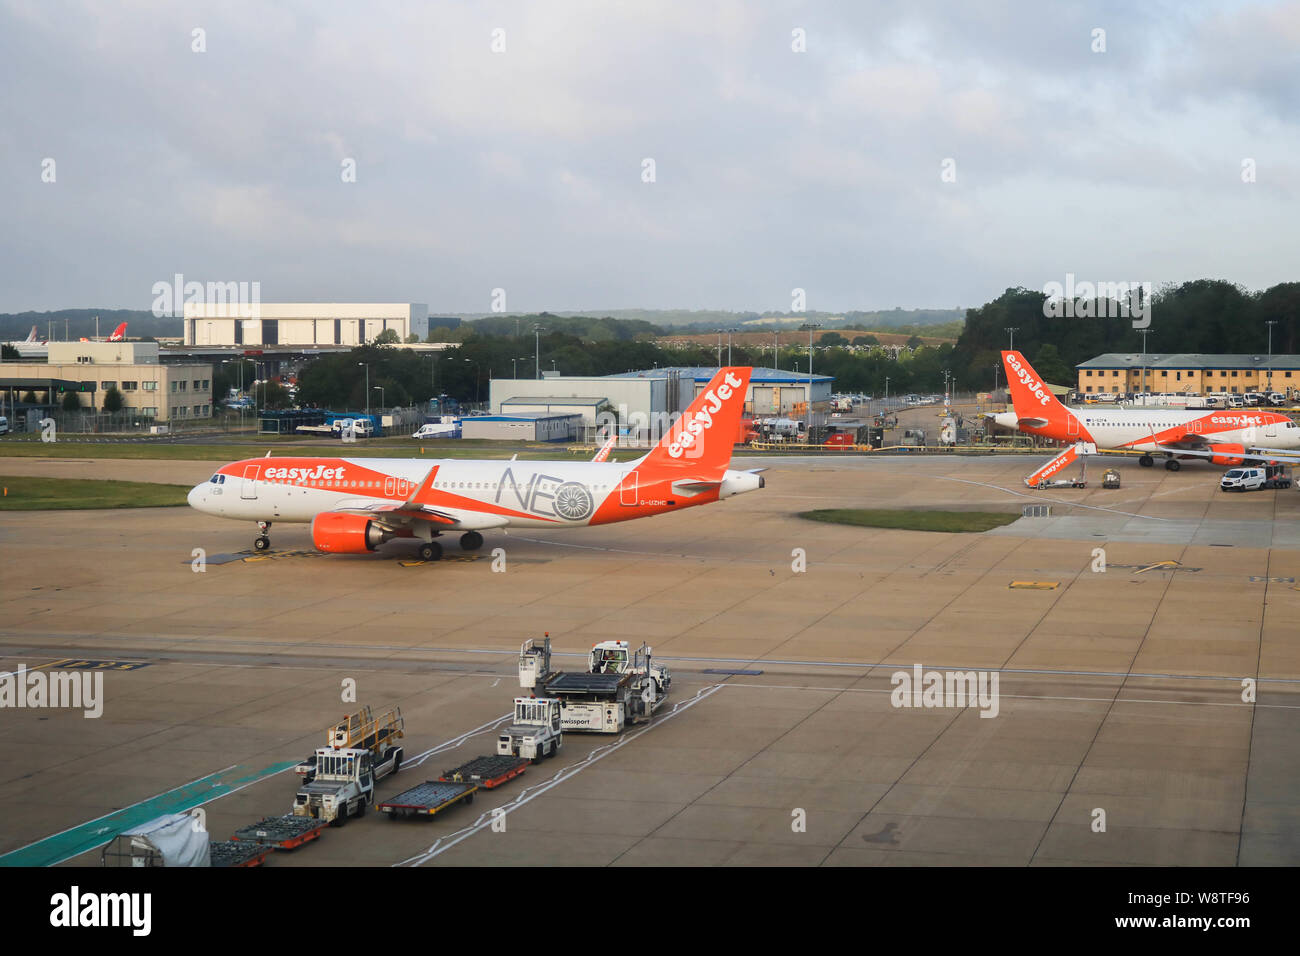 August 11, 2019, London, United Kingdom: An EasyJet aircraft seen on the runway  at Gatwick Airport in London. (Credit Image: © Amer Ghazzal/SOPA Images via ZUMA Wire) Stock Photo